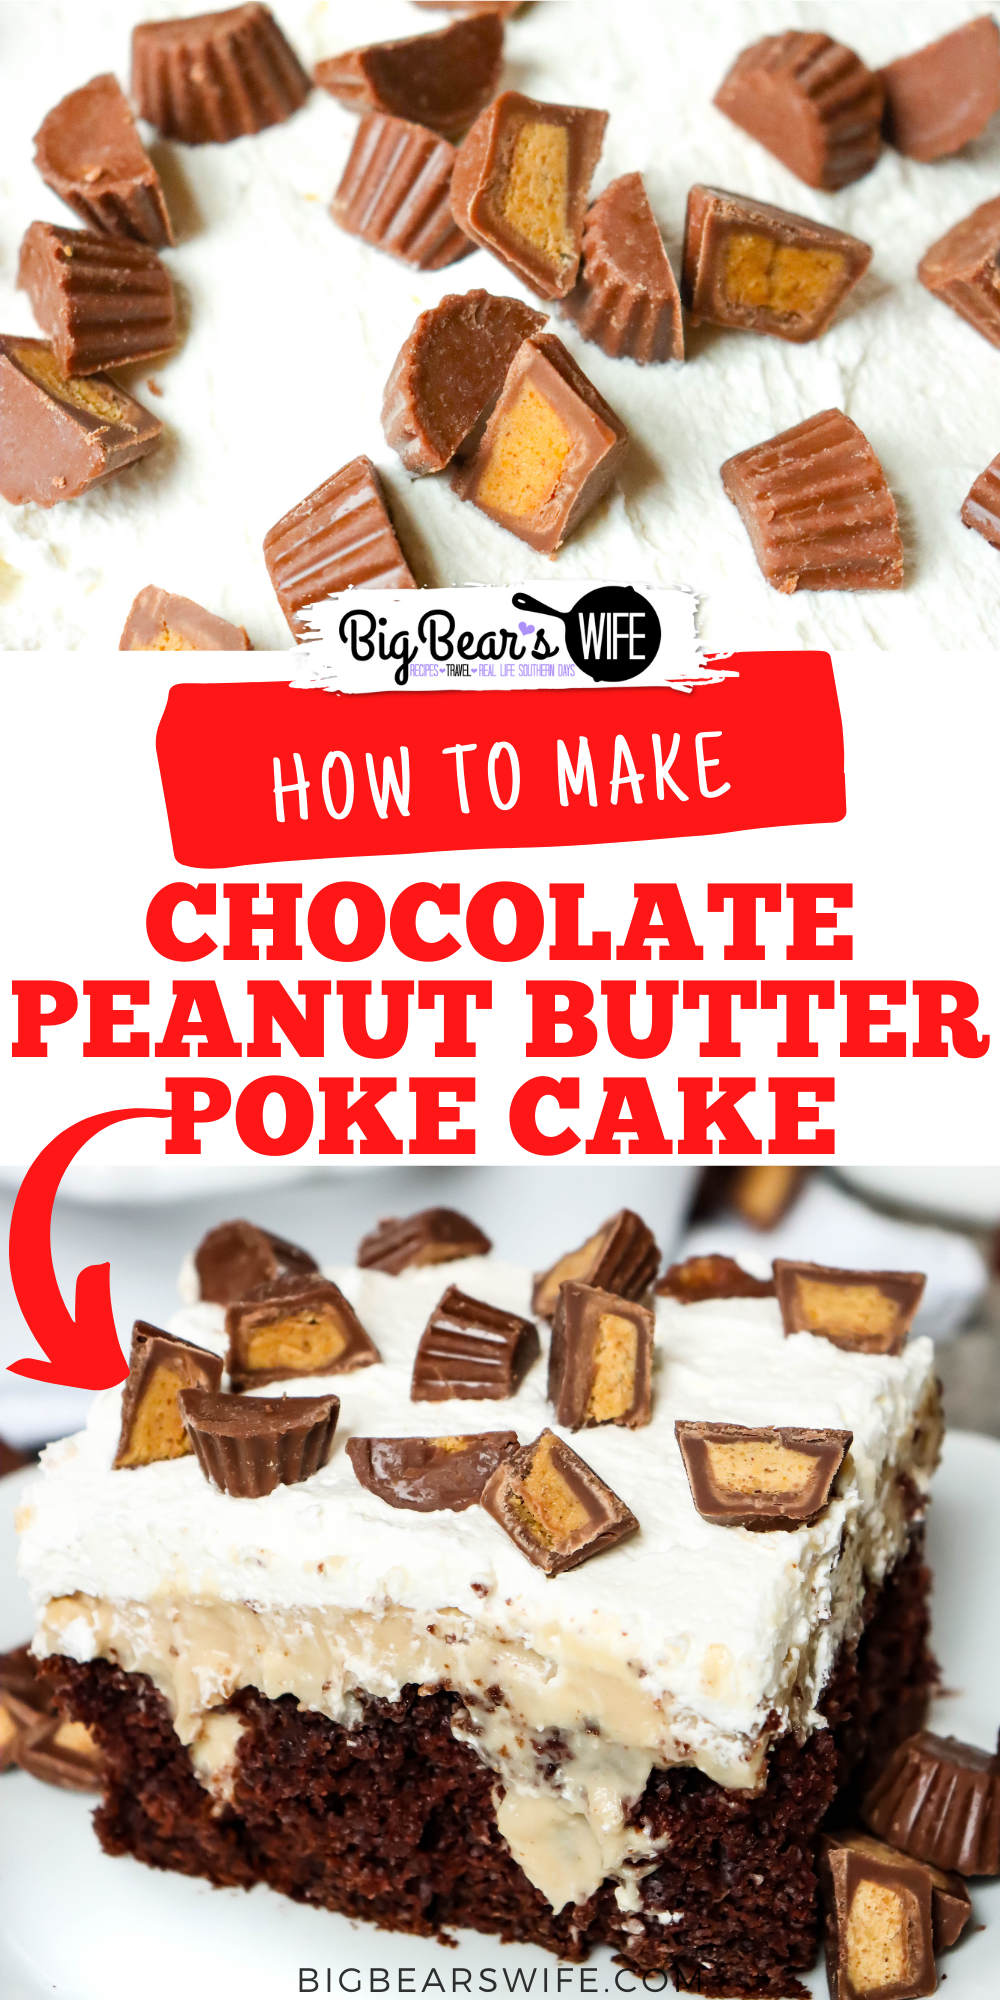 This Chocolate Peanut Butter Poke Cake is a rich homemade chocolate cake topped with homemade peanut butter pudding, Crème Chantilly and chopped peanut butter cups makes the perfect treat! Peanut Butter and Chocolate lovers will go crazy over this fun cake!  via @bigbearswife